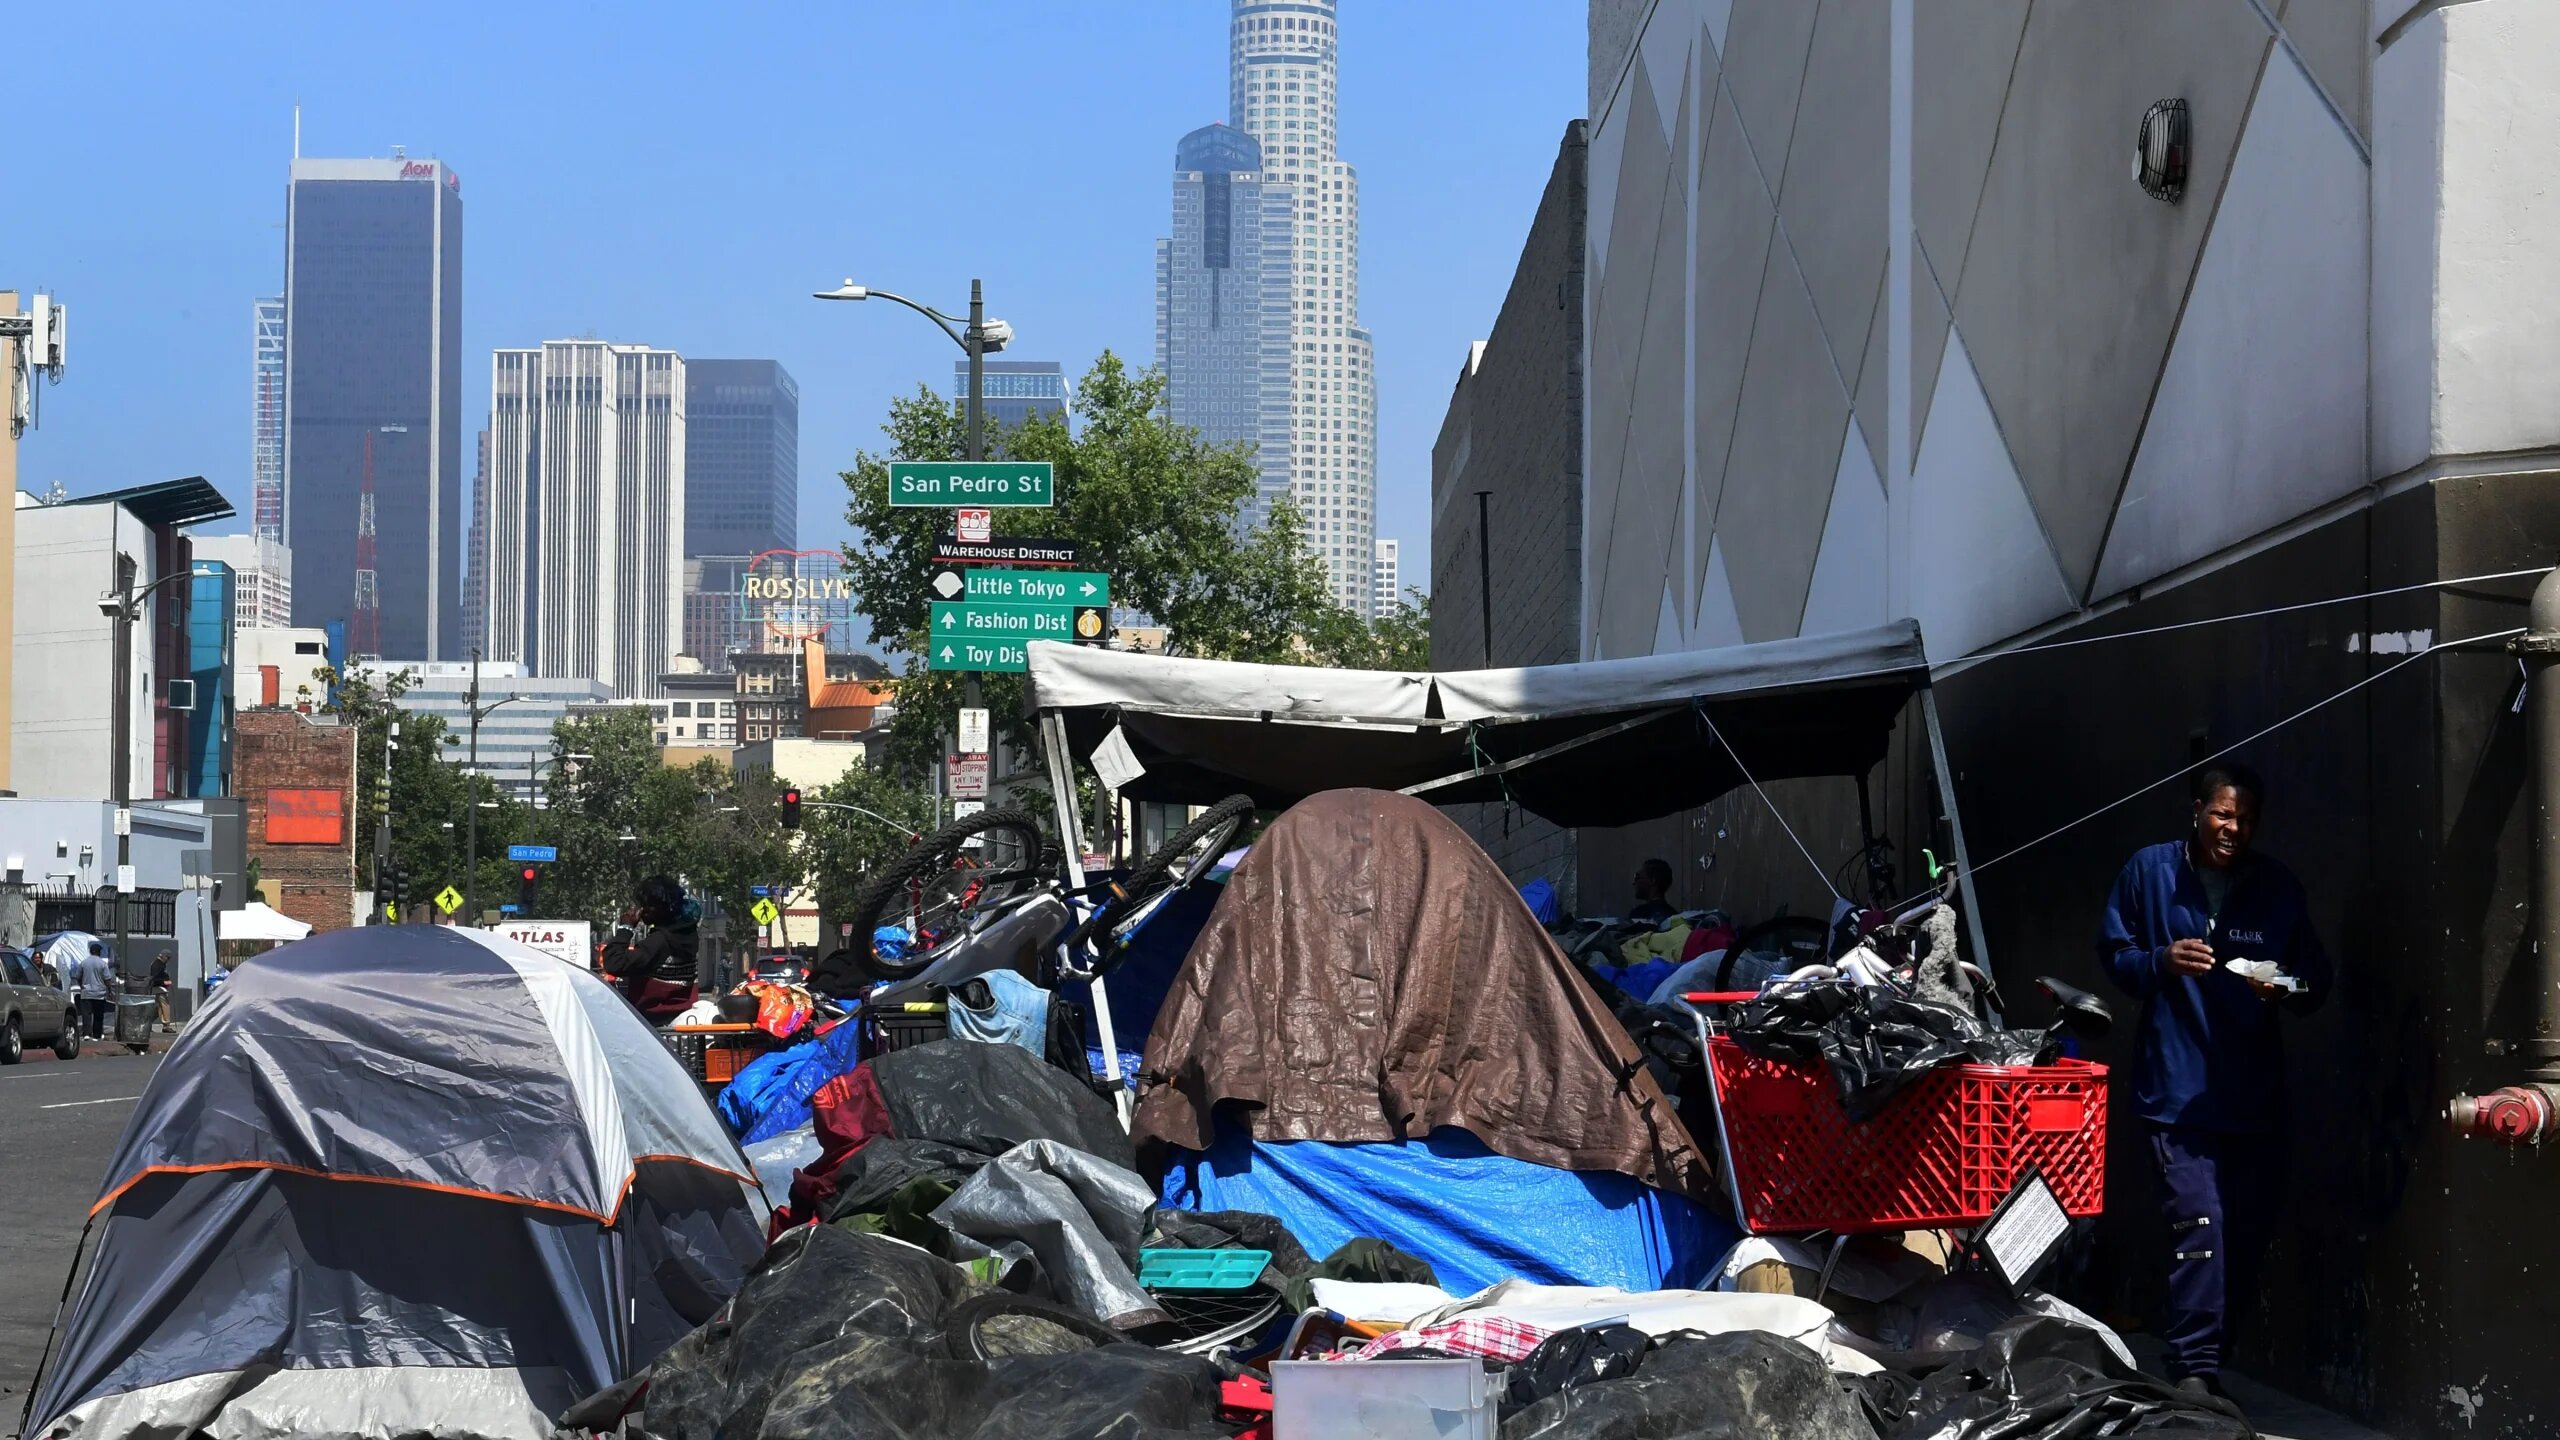 Los Angeles: City Council Has Approved A Comprehensive Ban On Homeless Camping Near Schools And Daycares